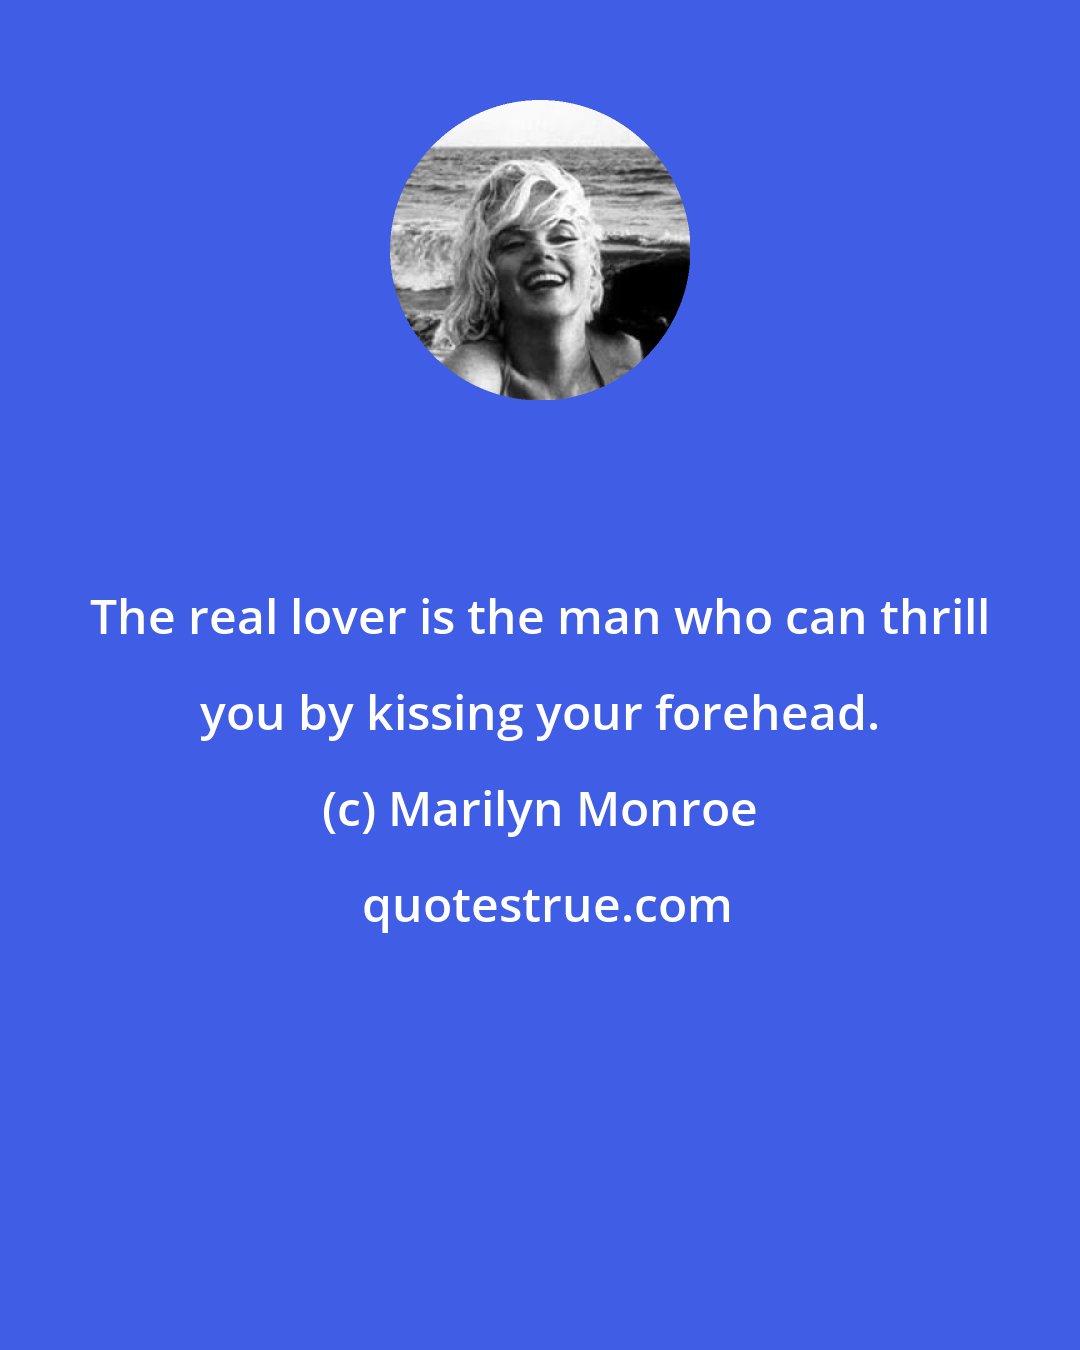 Marilyn Monroe: The real lover is the man who can thrill you by kissing your forehead.